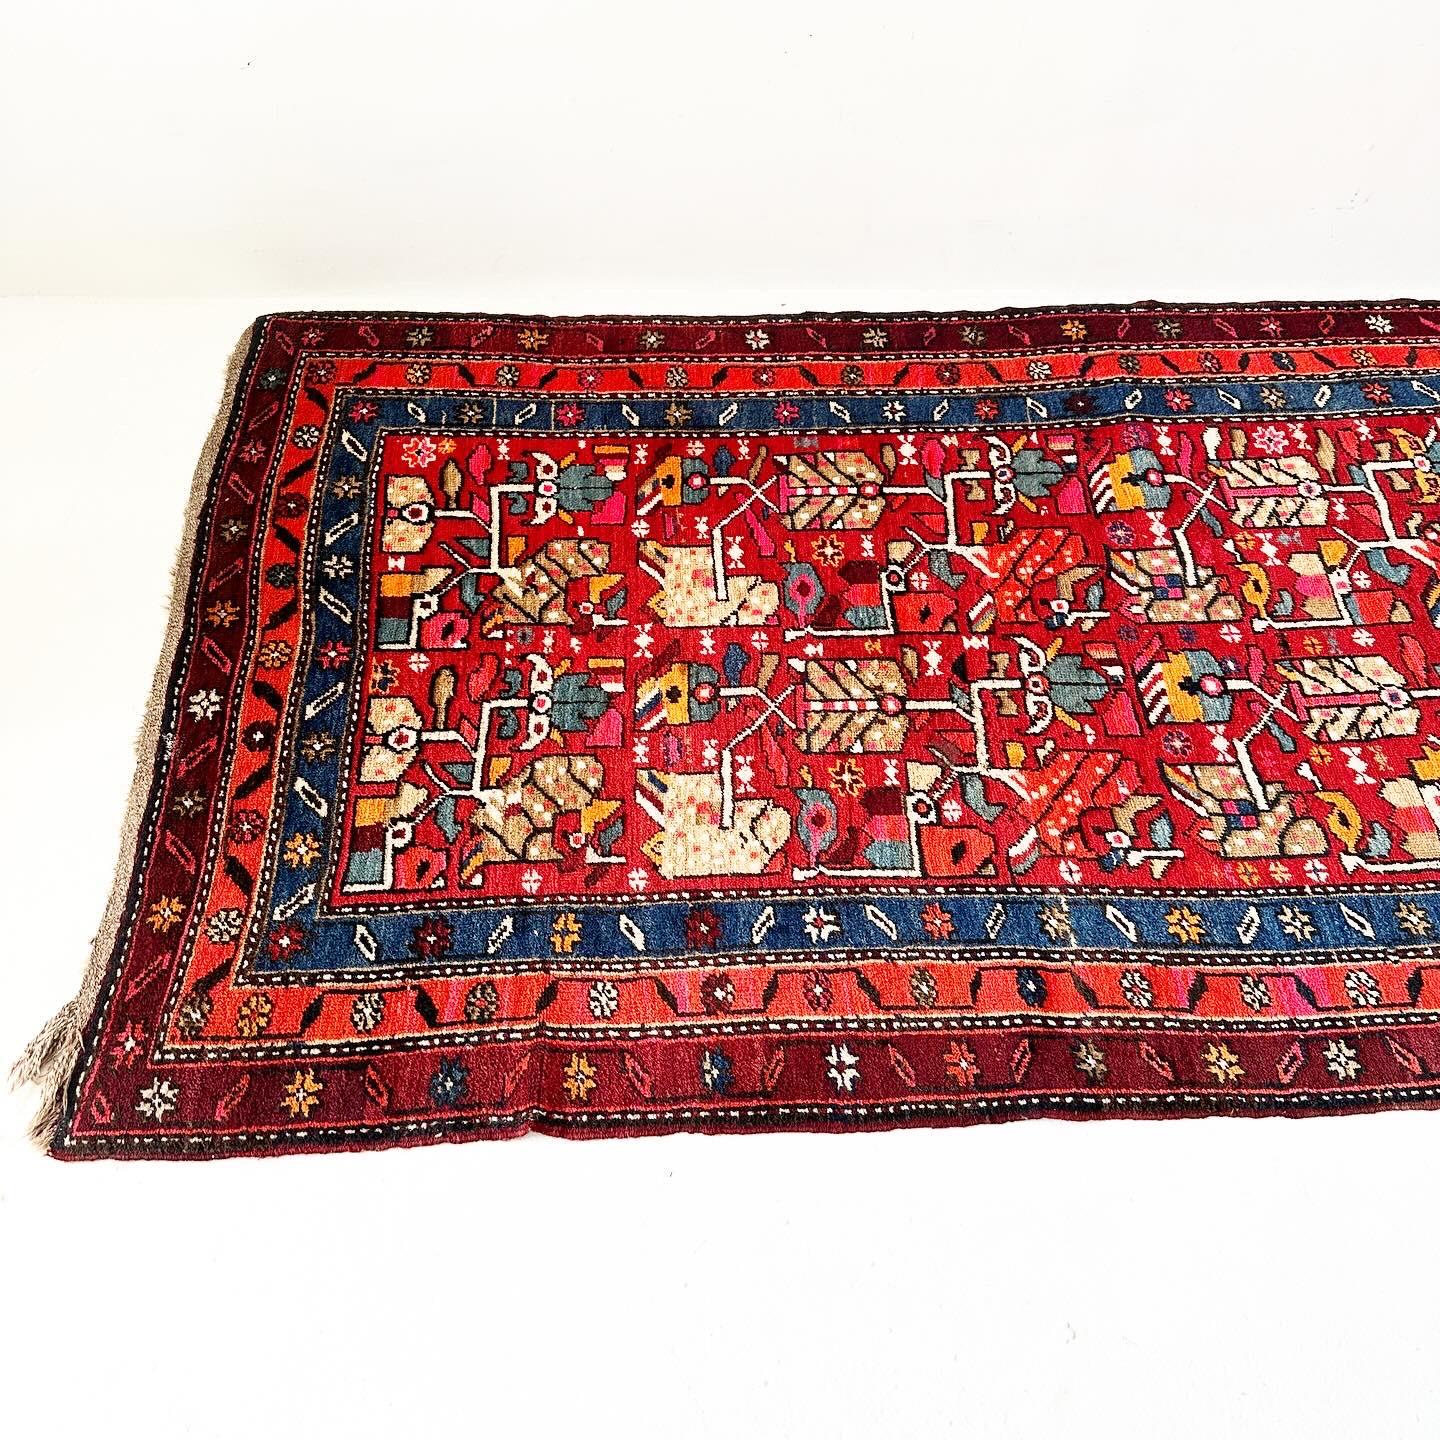 Uniquely shaped vintage hand knotted Turkish rug with low pile -- long like a runner, but as broad as a standard rug. Vivid colors, one of my favorites!

L139 (11' 7